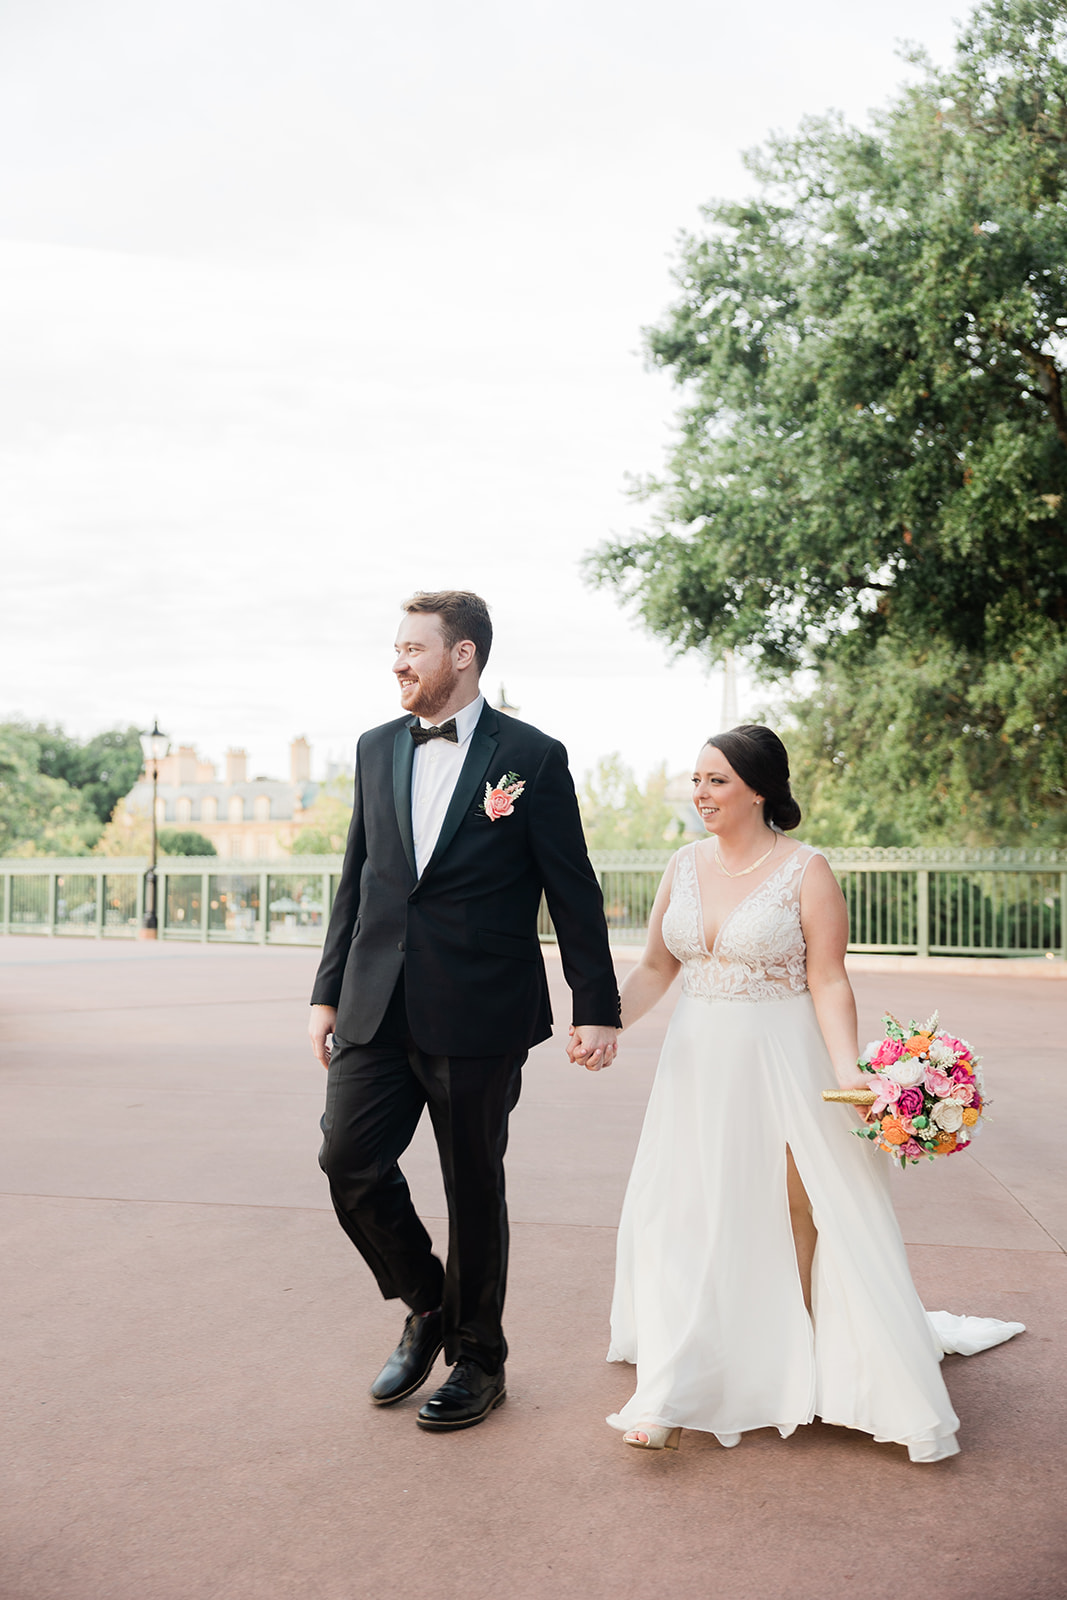 Couple wedding photos at the Canadian Pavilion at Disney Epcot by Jess Collin 